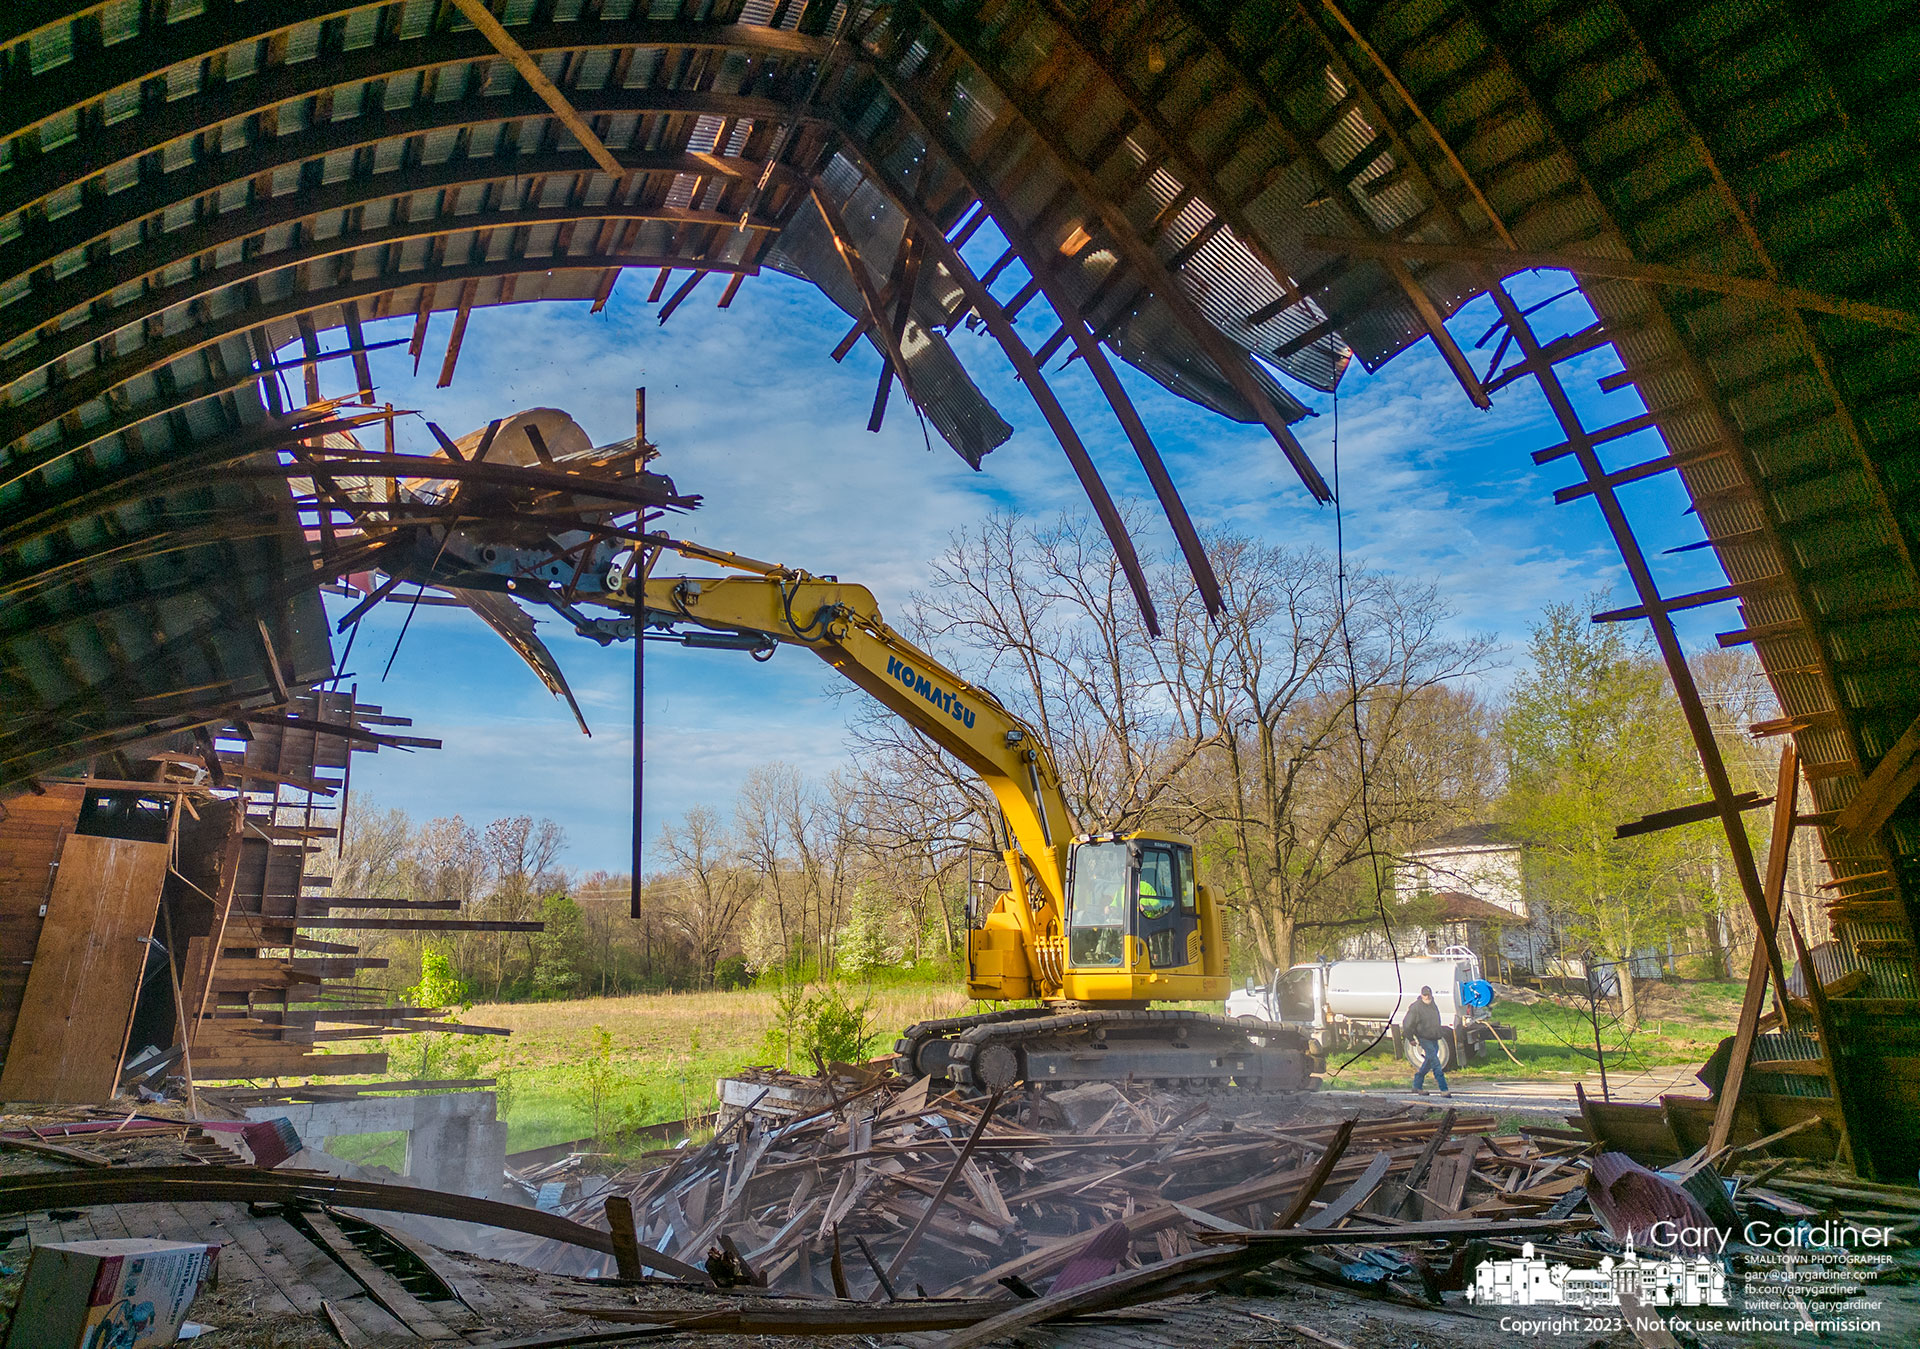 A demolition crew pulls down the Braun Farm barn before moving on the farmhouse, at rear, removing the last two farm buildings from the property on Cleveland Ave. My Final Photo for April 14, 2023.